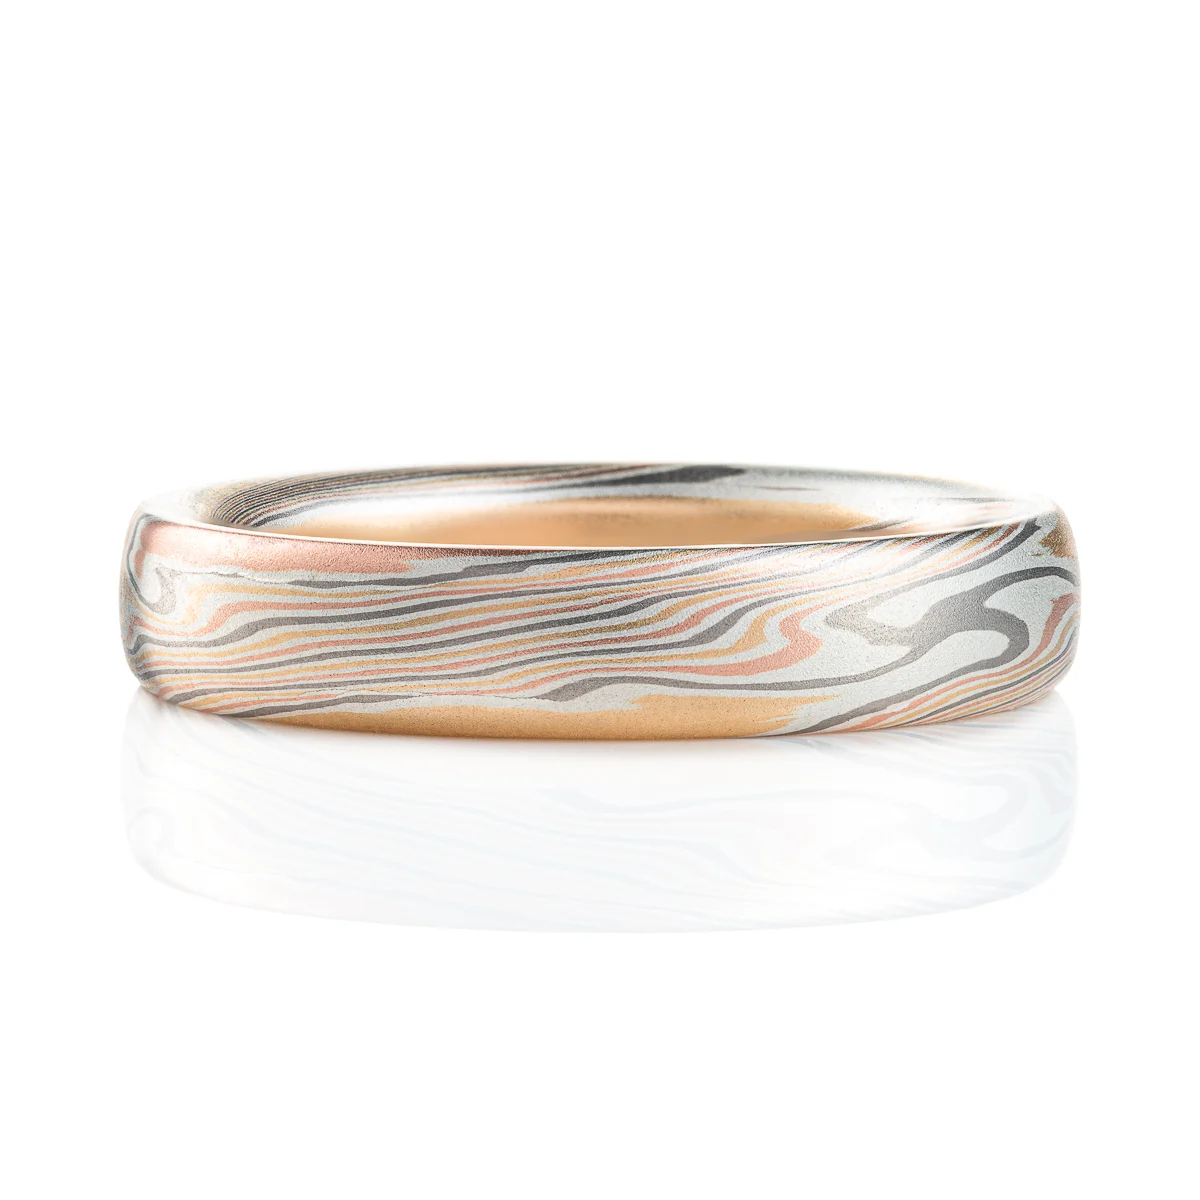 Classic narrow wedding band in a mokume twist pattern, with a domed profile and smooth surface, made with layers of red gold, silver, palladium and yellow gold.